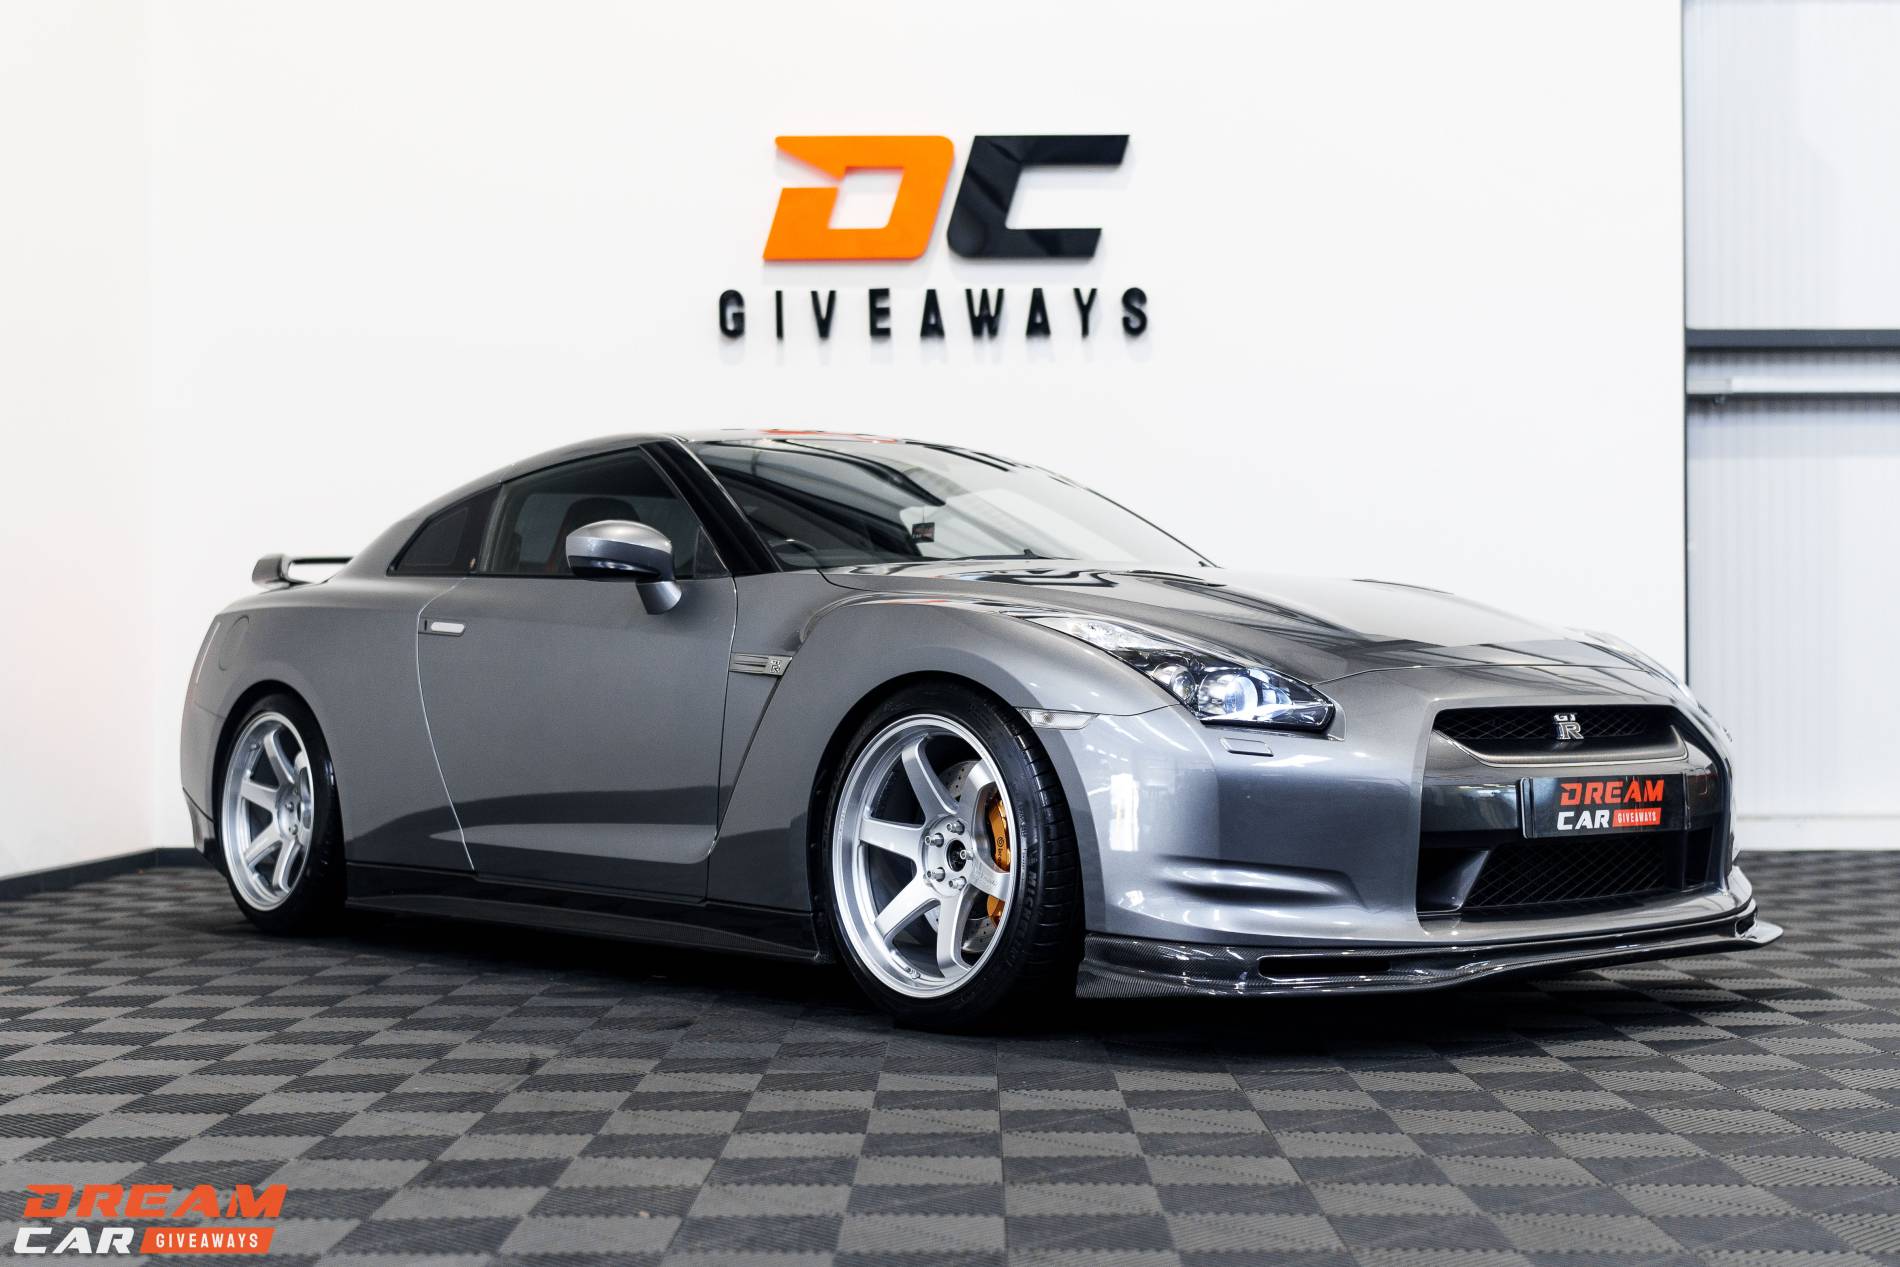 Win This Nissan R35 GTR & £1,000 or £35,000 Tax Free